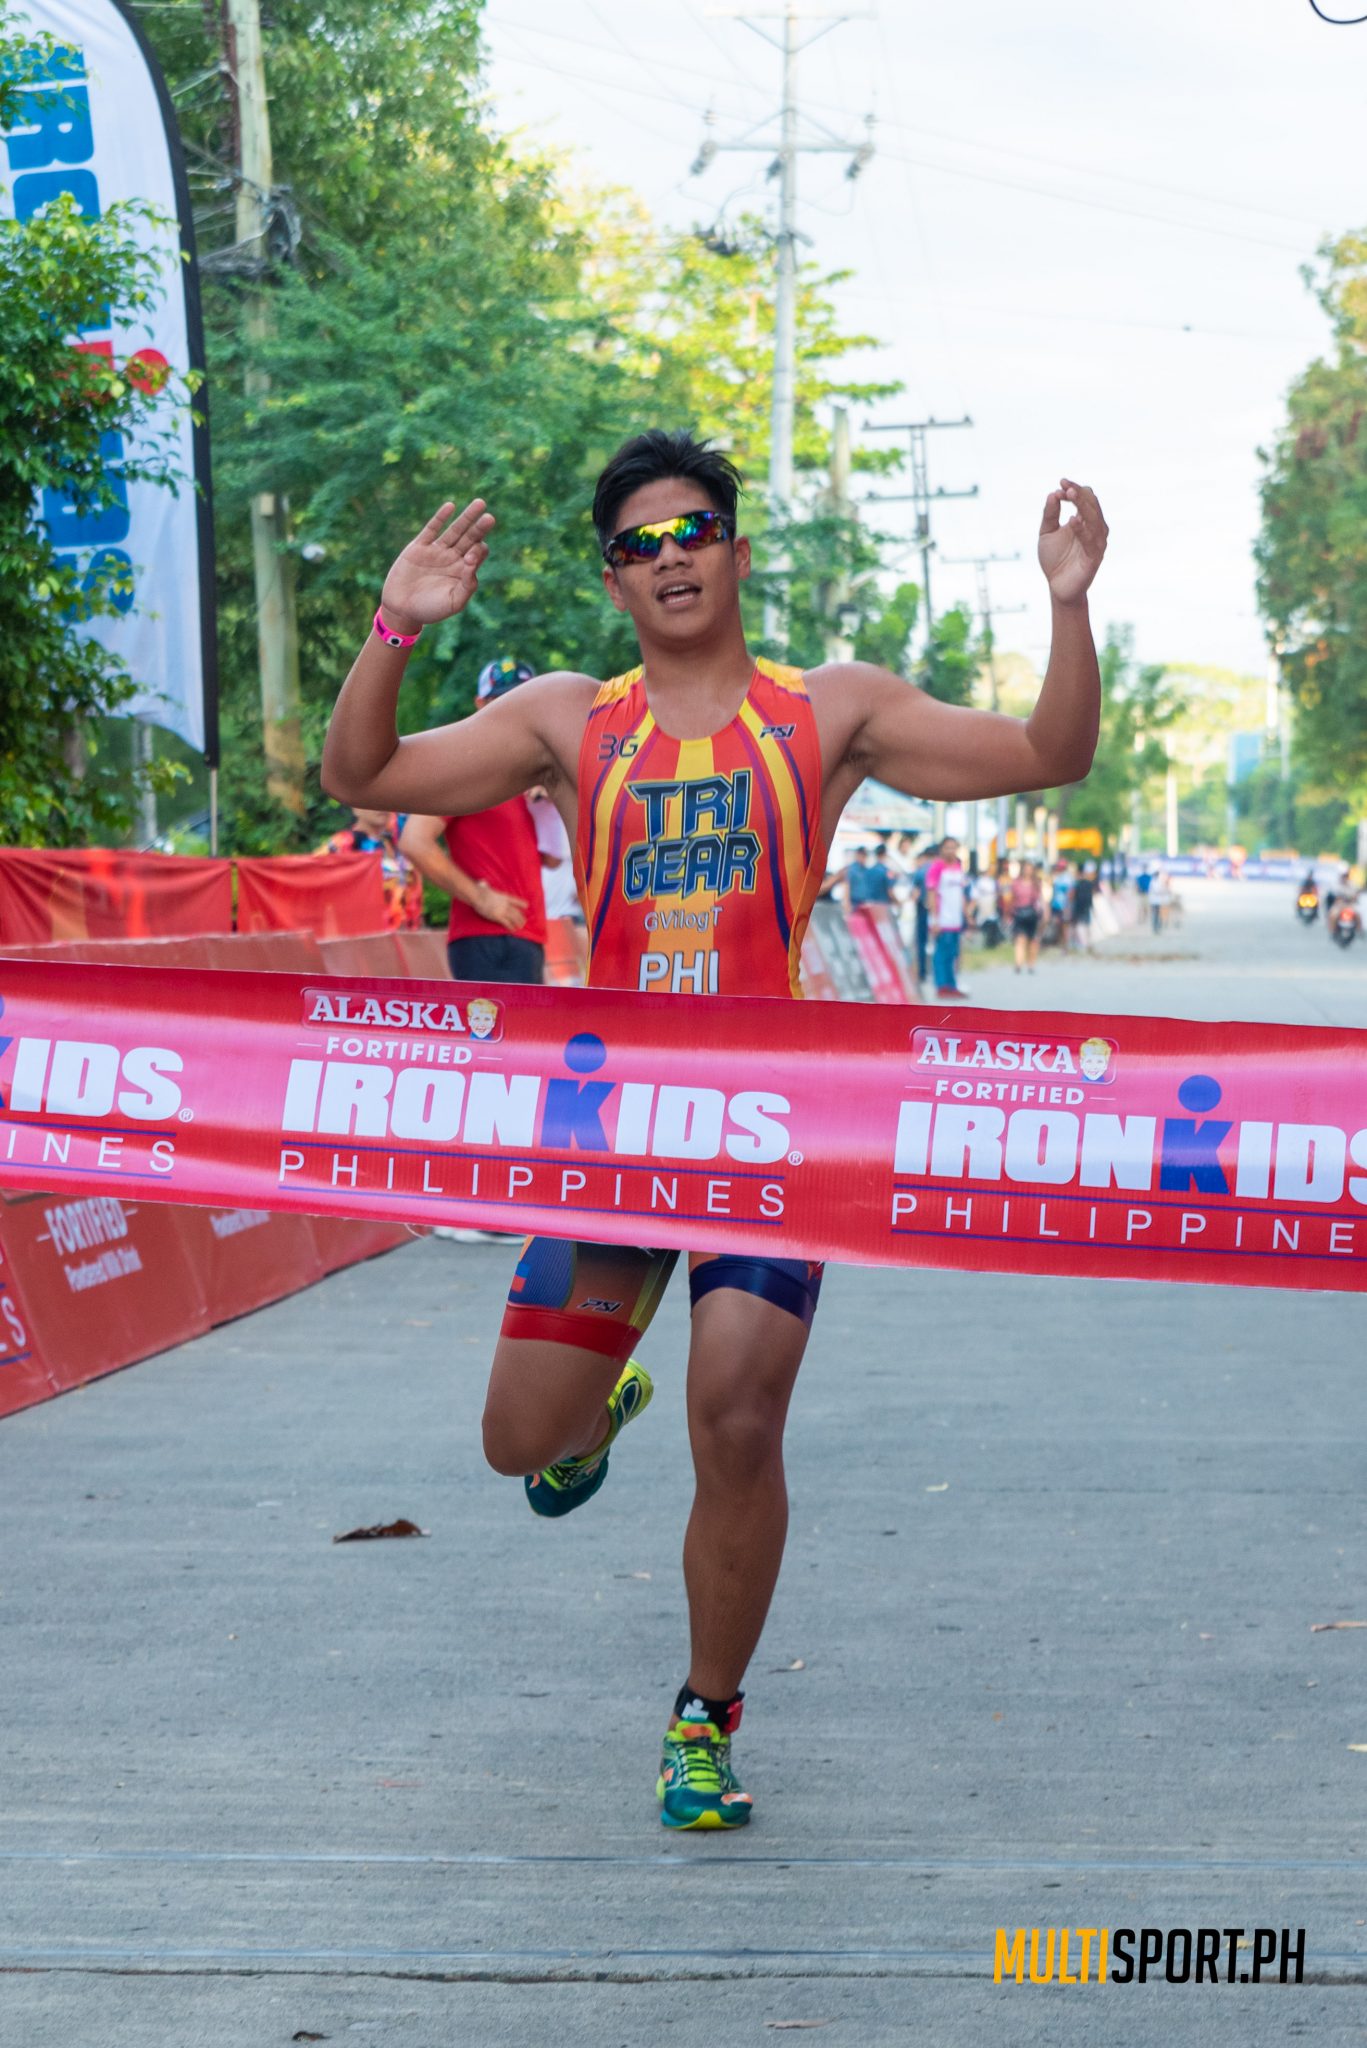 Zedrick James Borja came in third at the Alaska IronKids male division